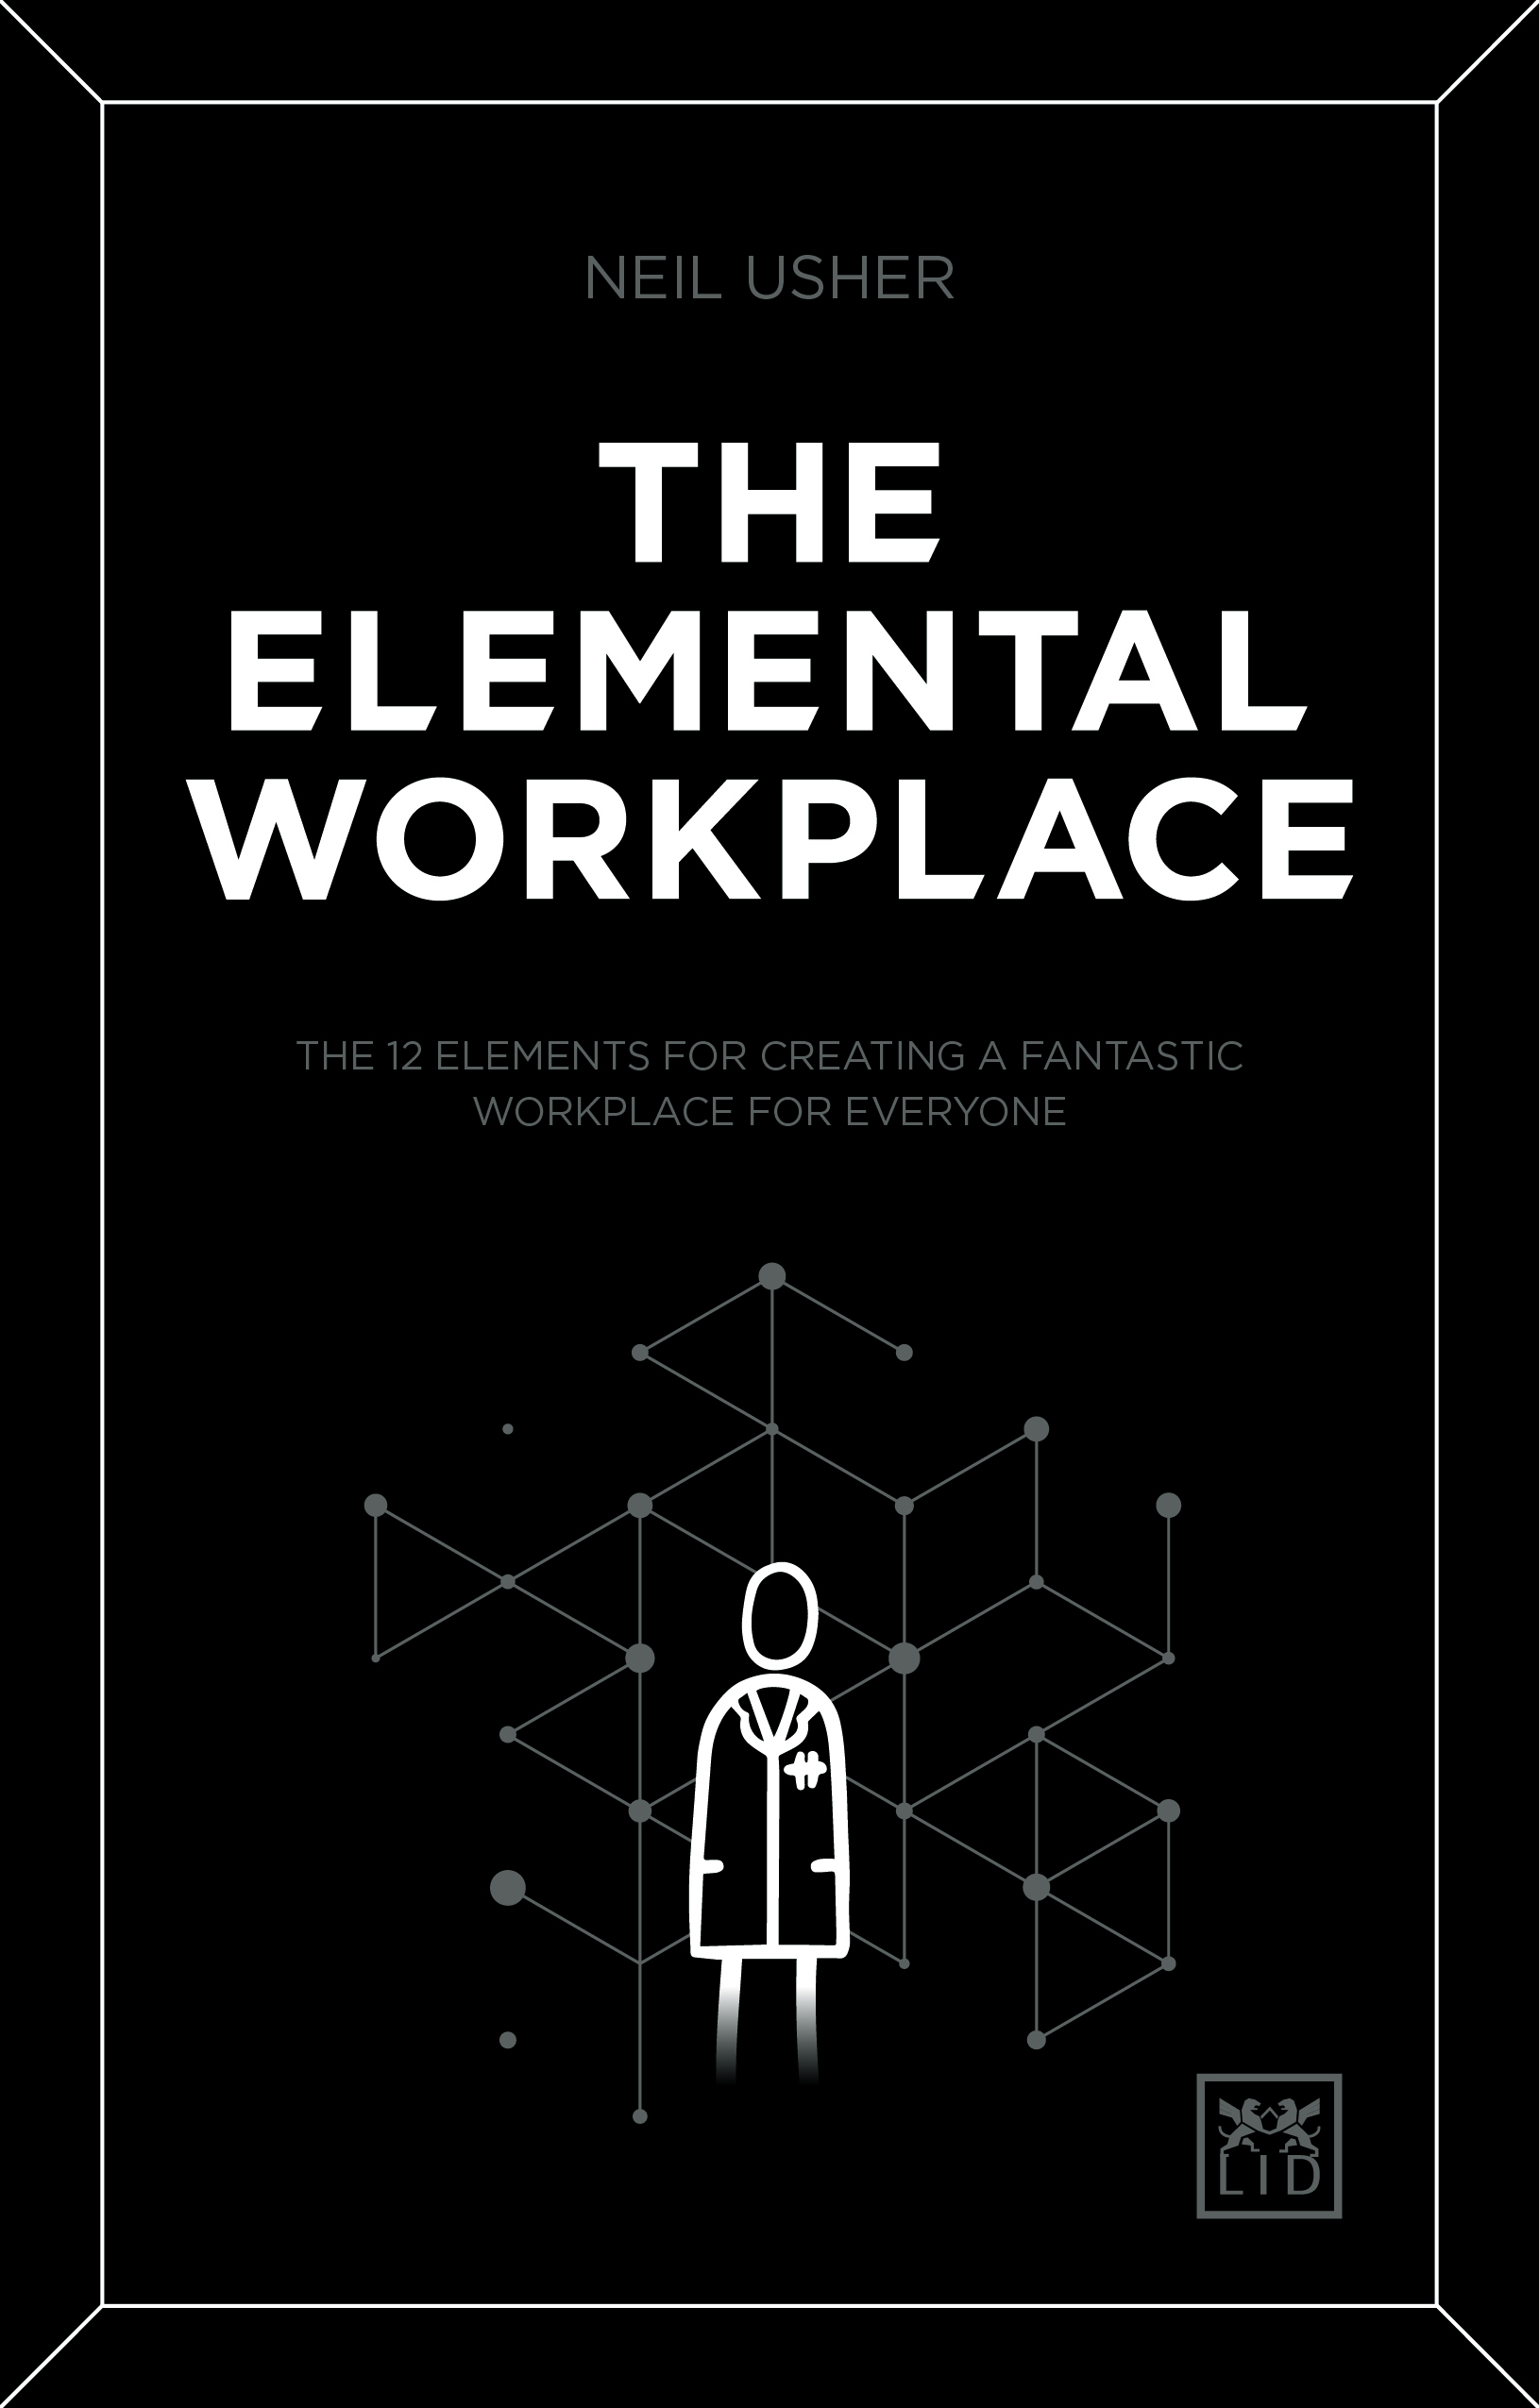 The Elemental Workplace: The 12 Elements for Creating a Fantastic Workplace for Everyone